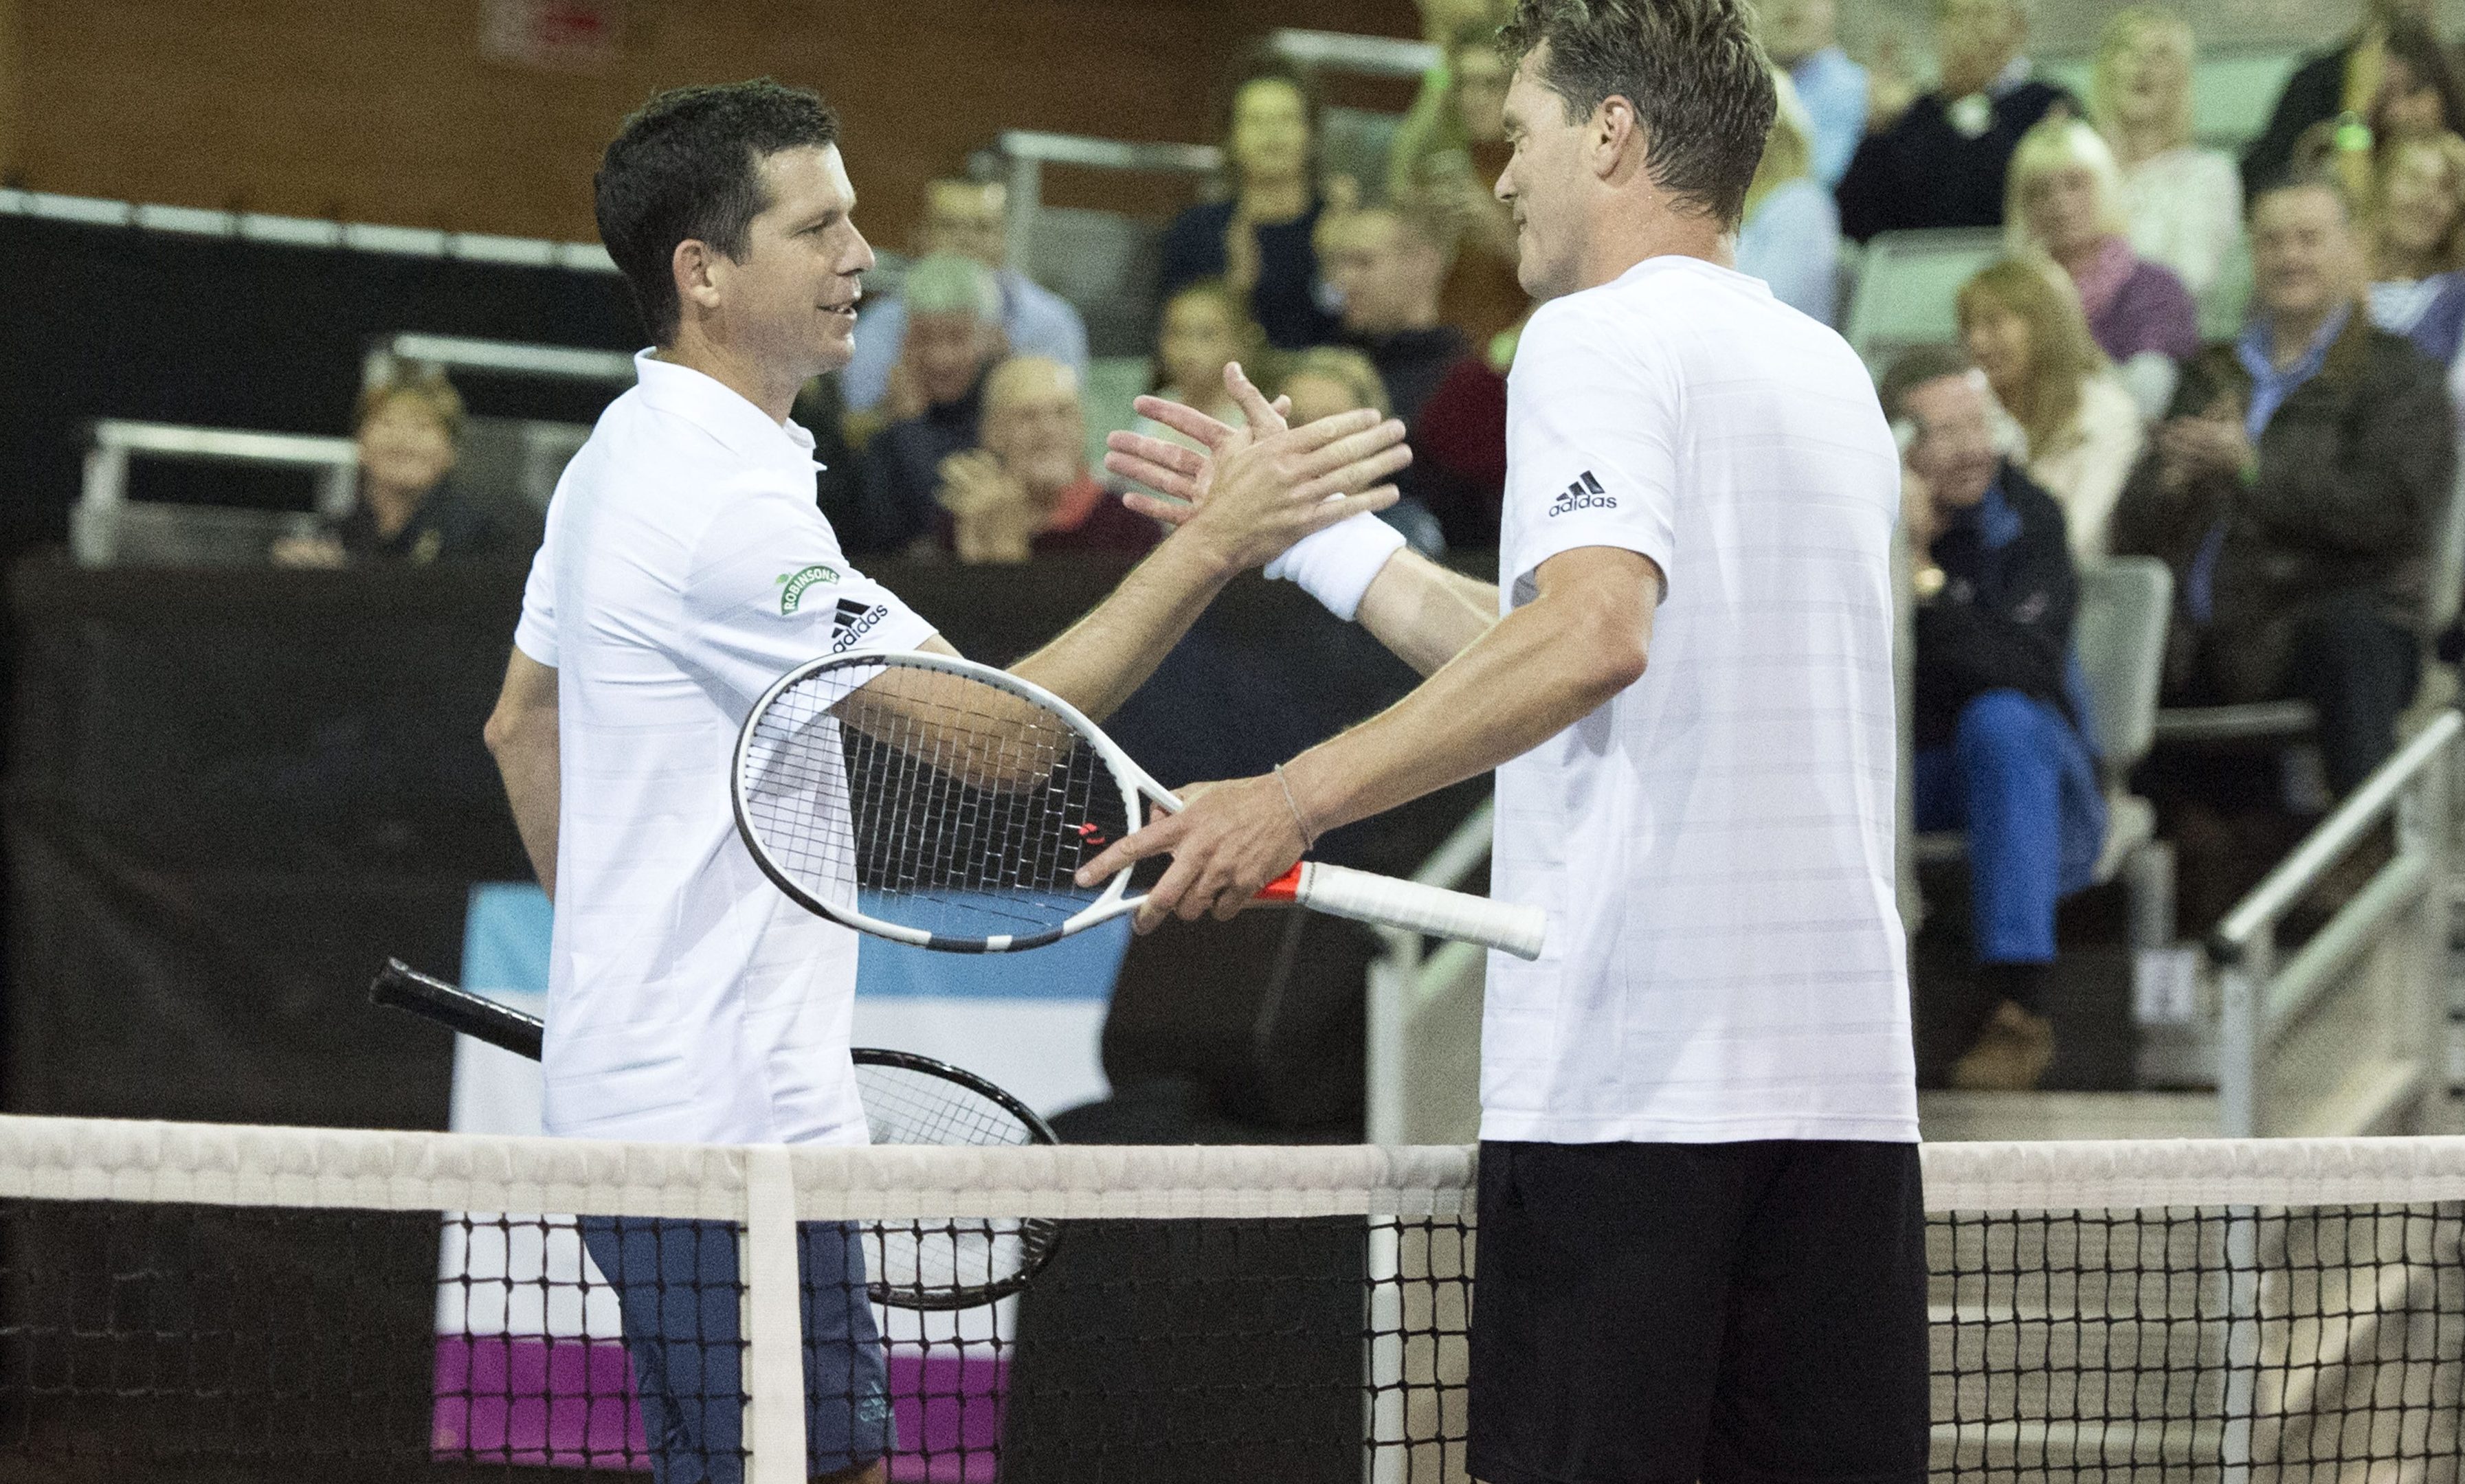 Tim Henman (left) with Thomas Enqvist will resume their rivalry at this year's Brodies Invitational tennis tournament. Enqvist won the 2016 title.